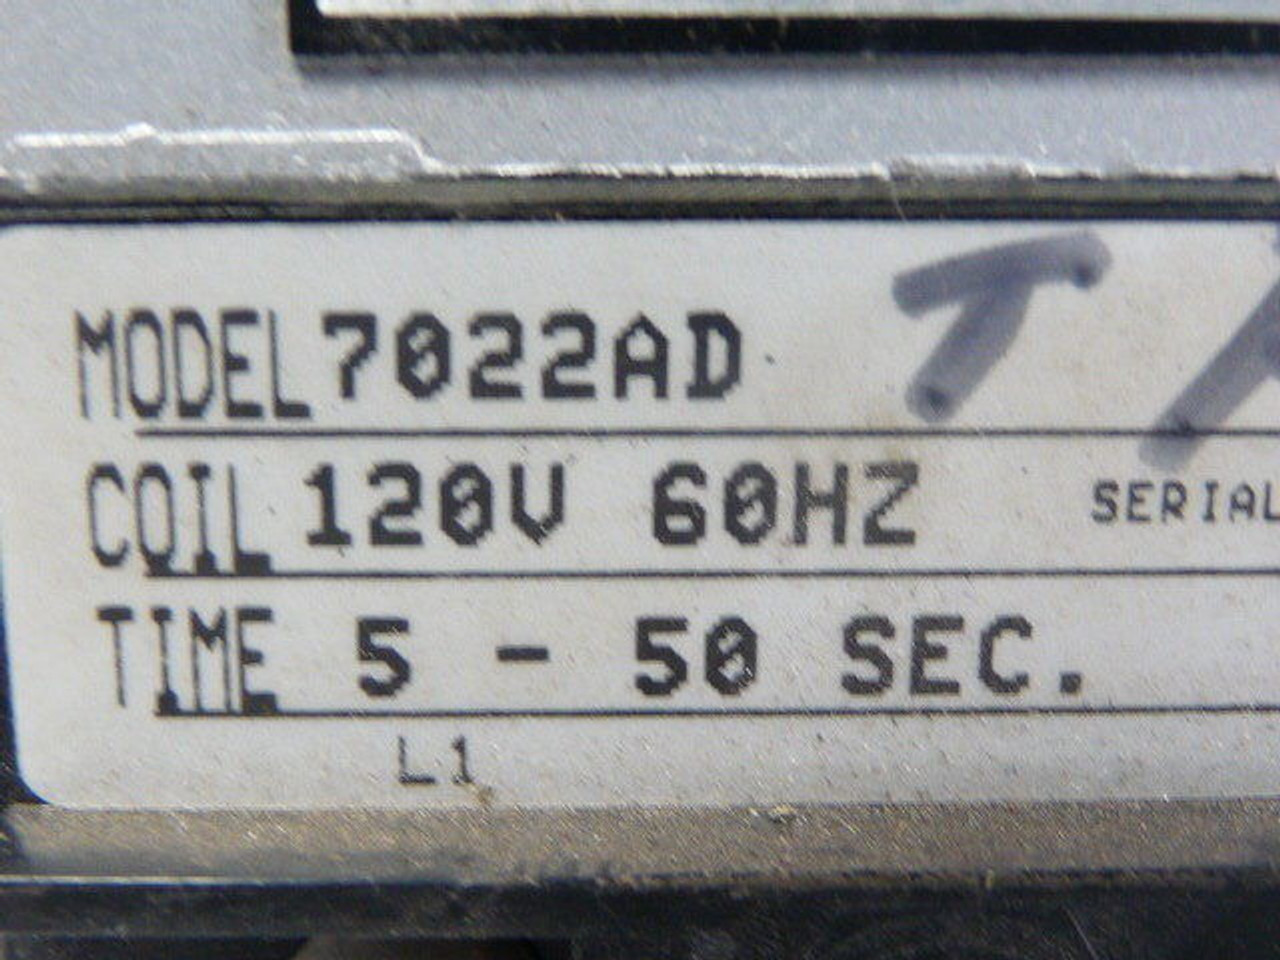 Agastat 7022AD Time Delay Relay 5-50sec 120VAC DPDT USED